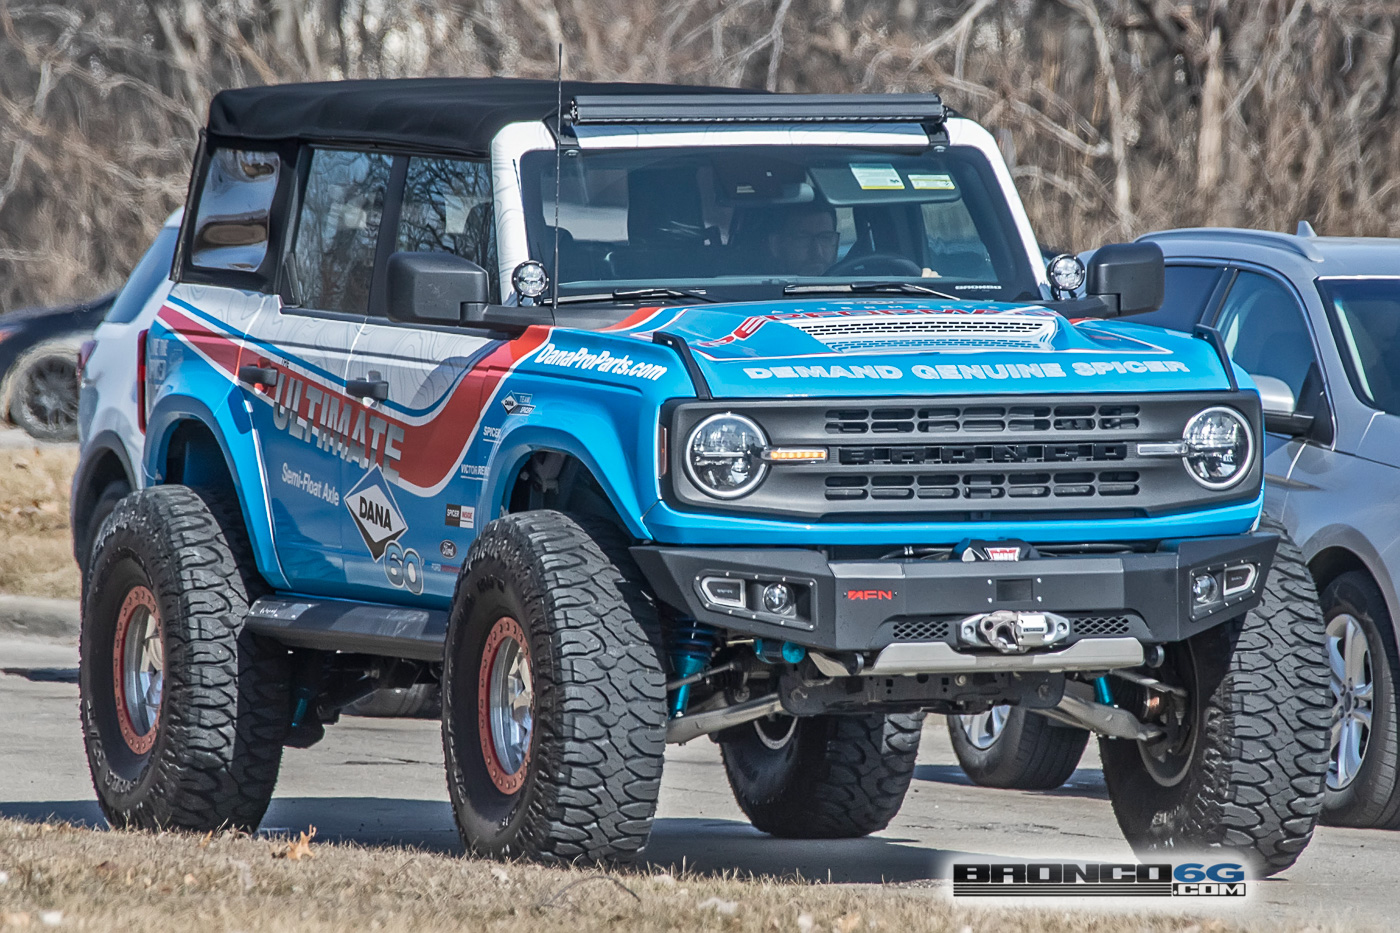 Ford Bronco The "Ultimate Ford Bronco Build" Caught Testing On The Streets Of Dearborn 20211111_105337